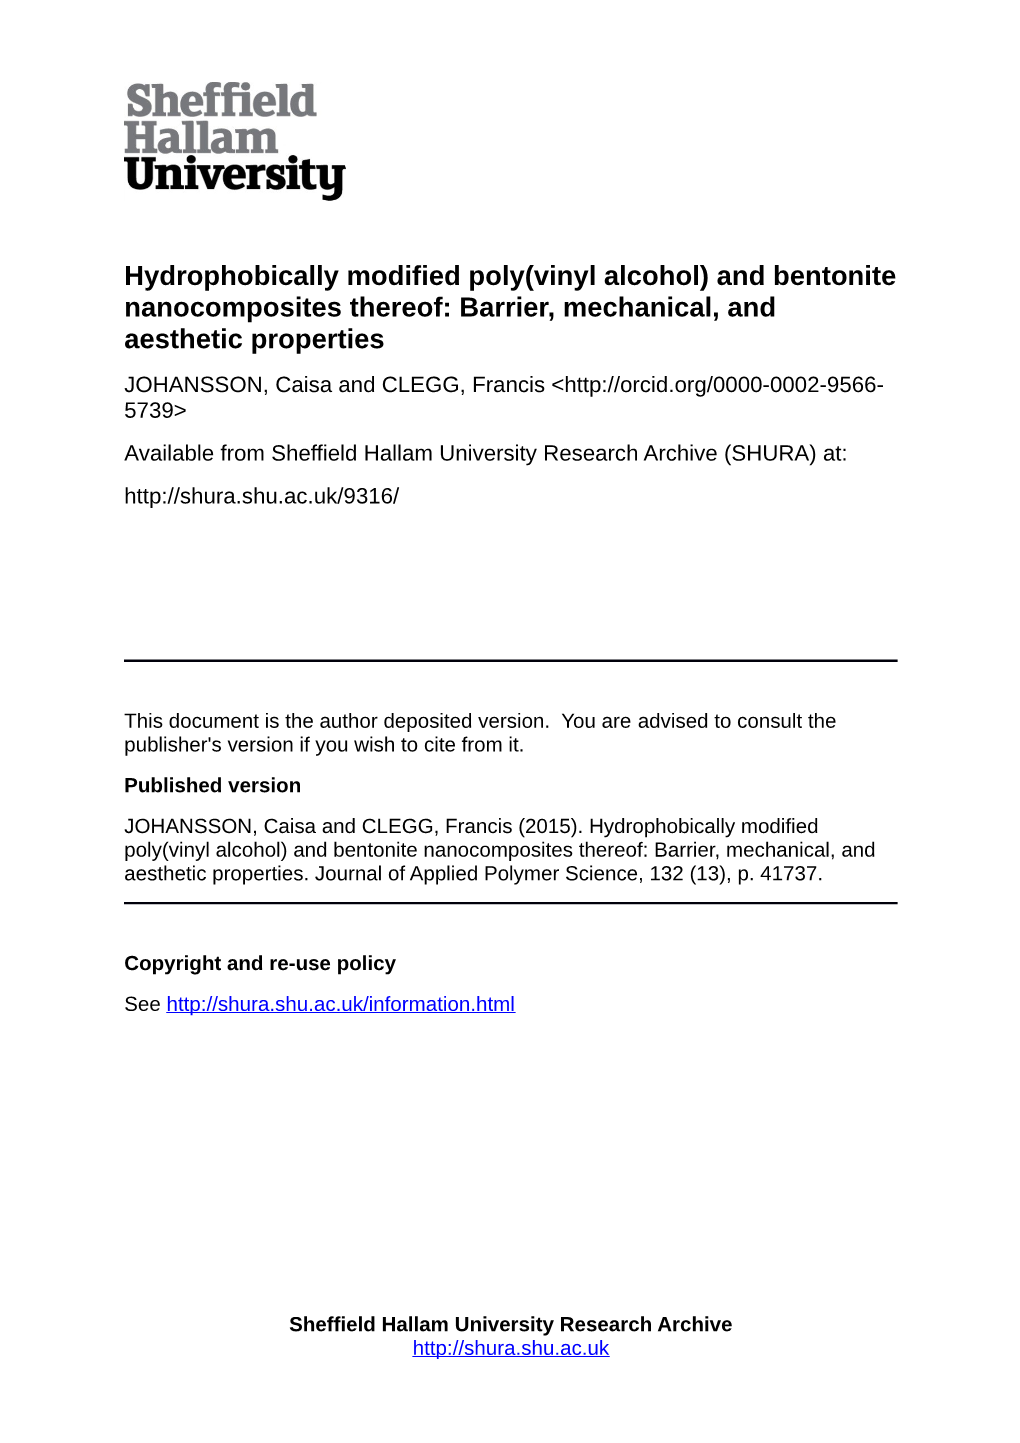 Hydrophobically Modified Poly(Vinyl Alcohol) and Bentonite